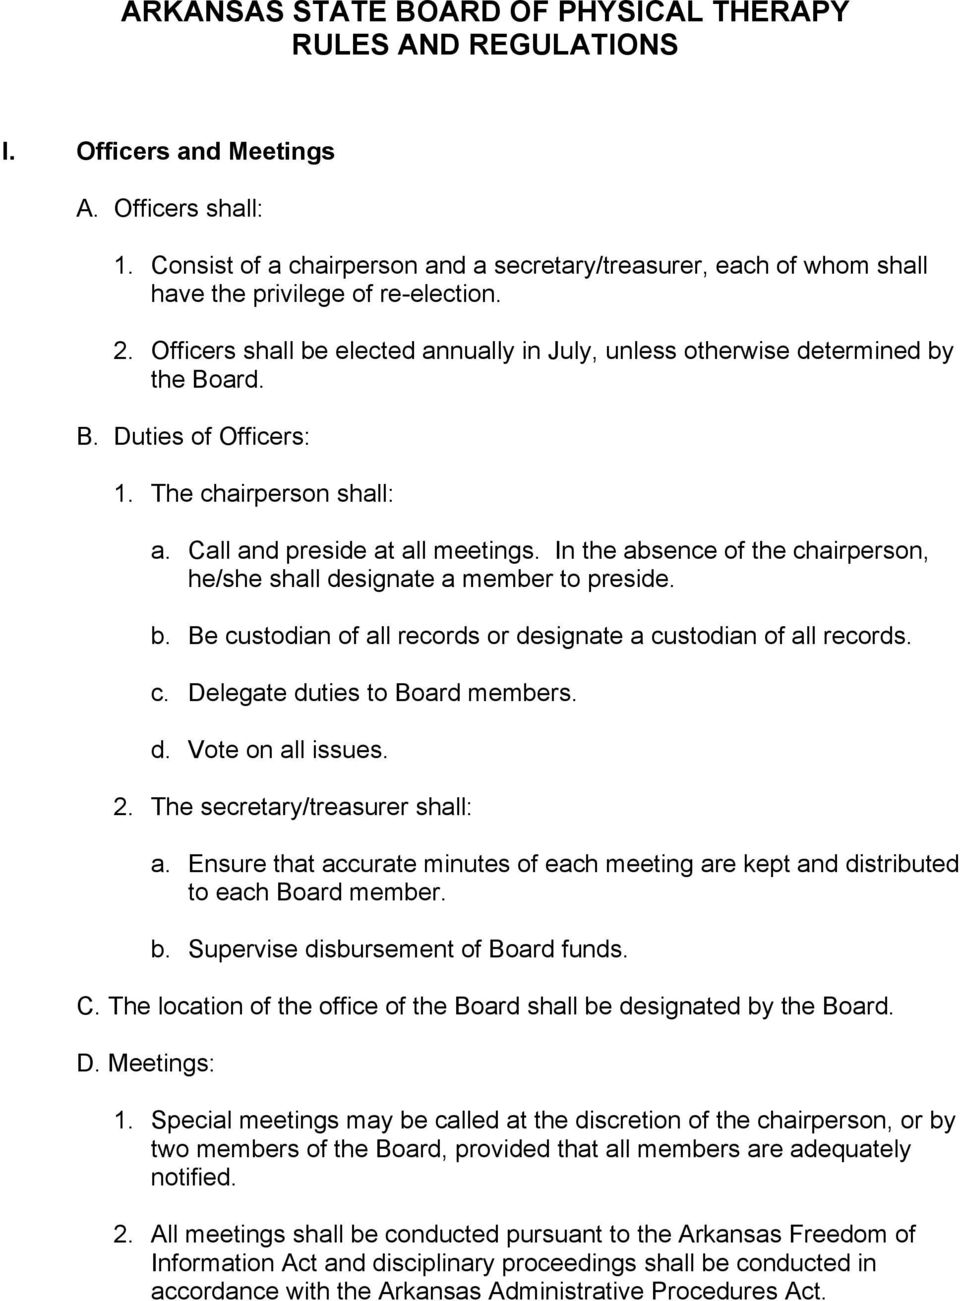 ard. B. Duties of Officers: 1. The chairperson shall: a. Call and preside at all meetings. In the absence of the chairperson, he/she shall designate a member to preside. b.